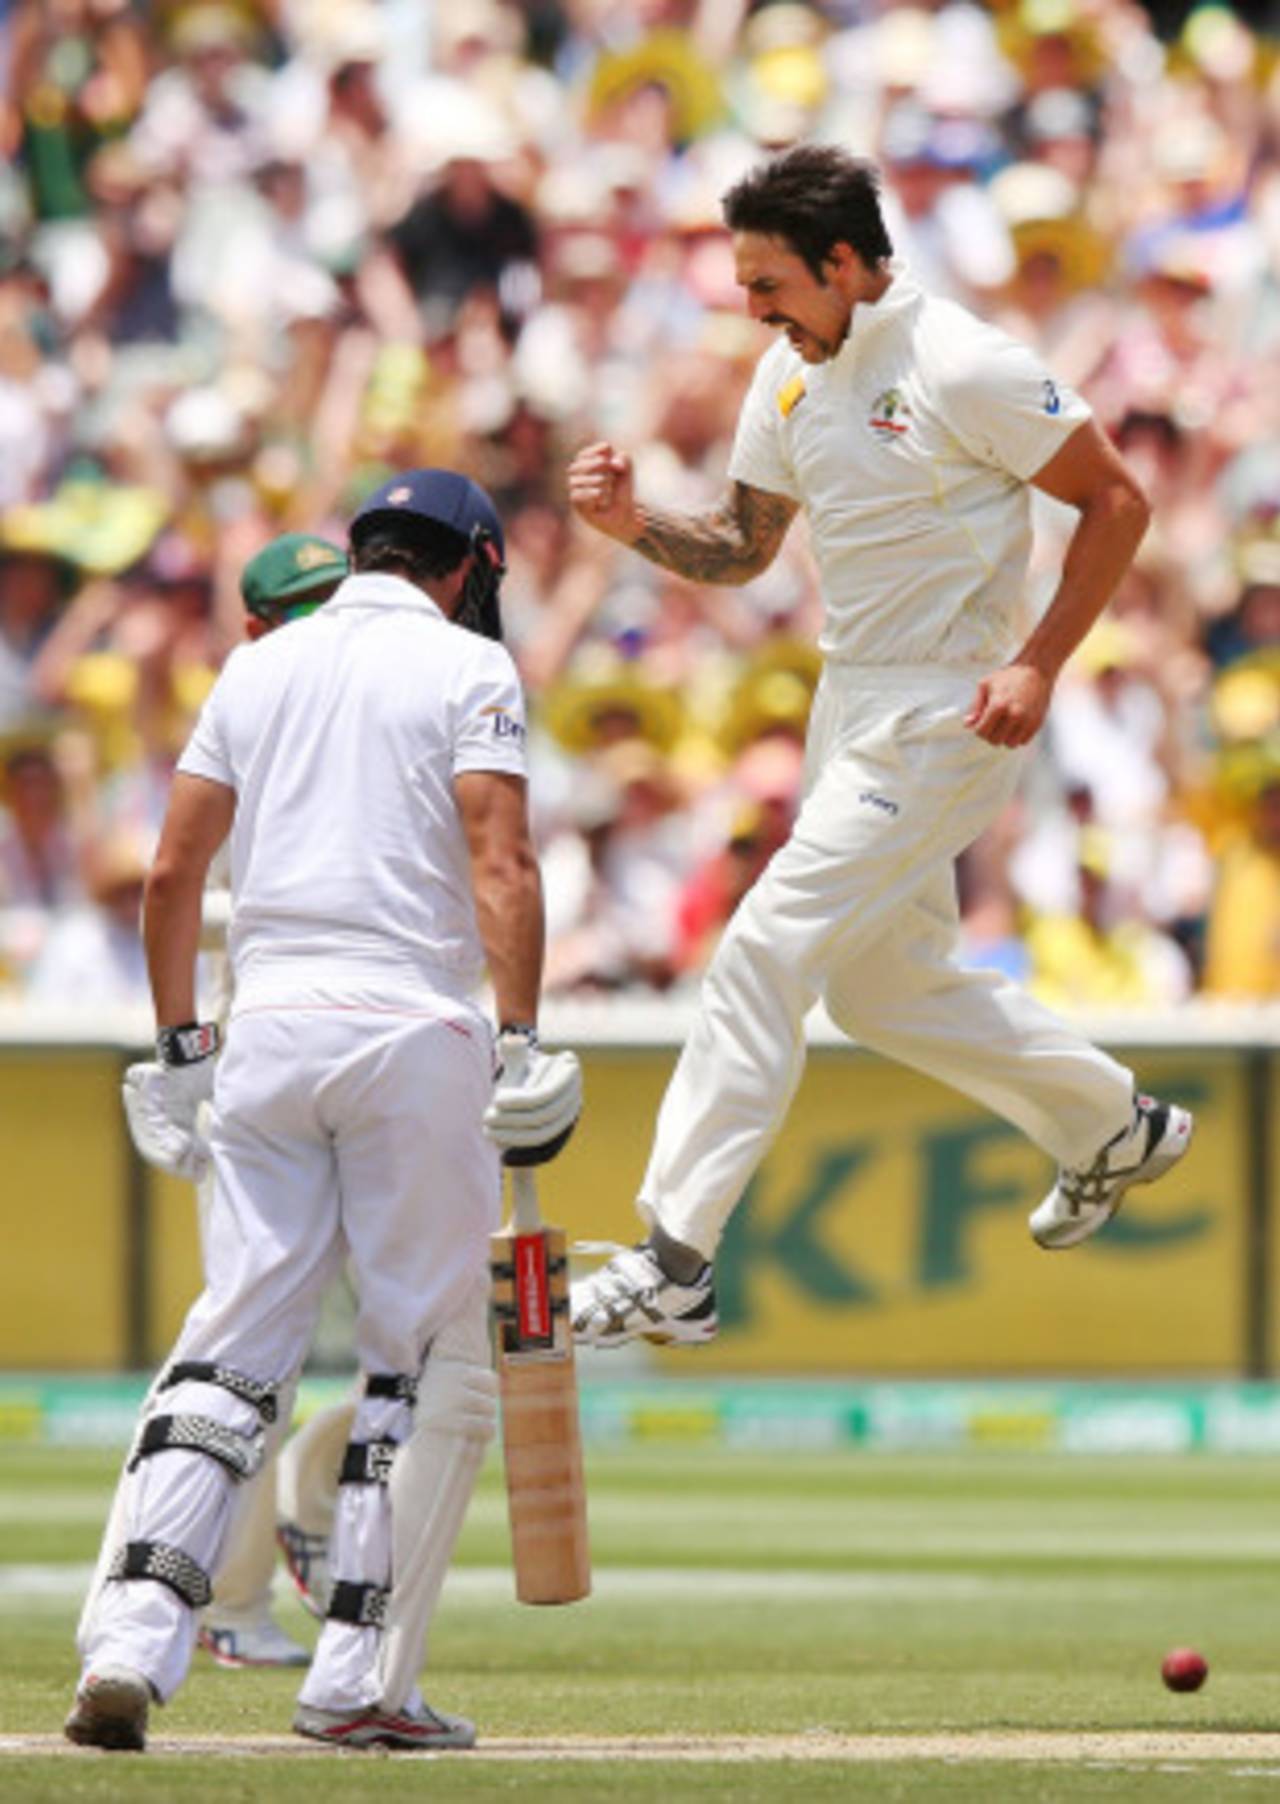 Mitchell Johnson has soared while Alastair Cook's confidence has nosedived&nbsp;&nbsp;&bull;&nbsp;&nbsp;Getty Images